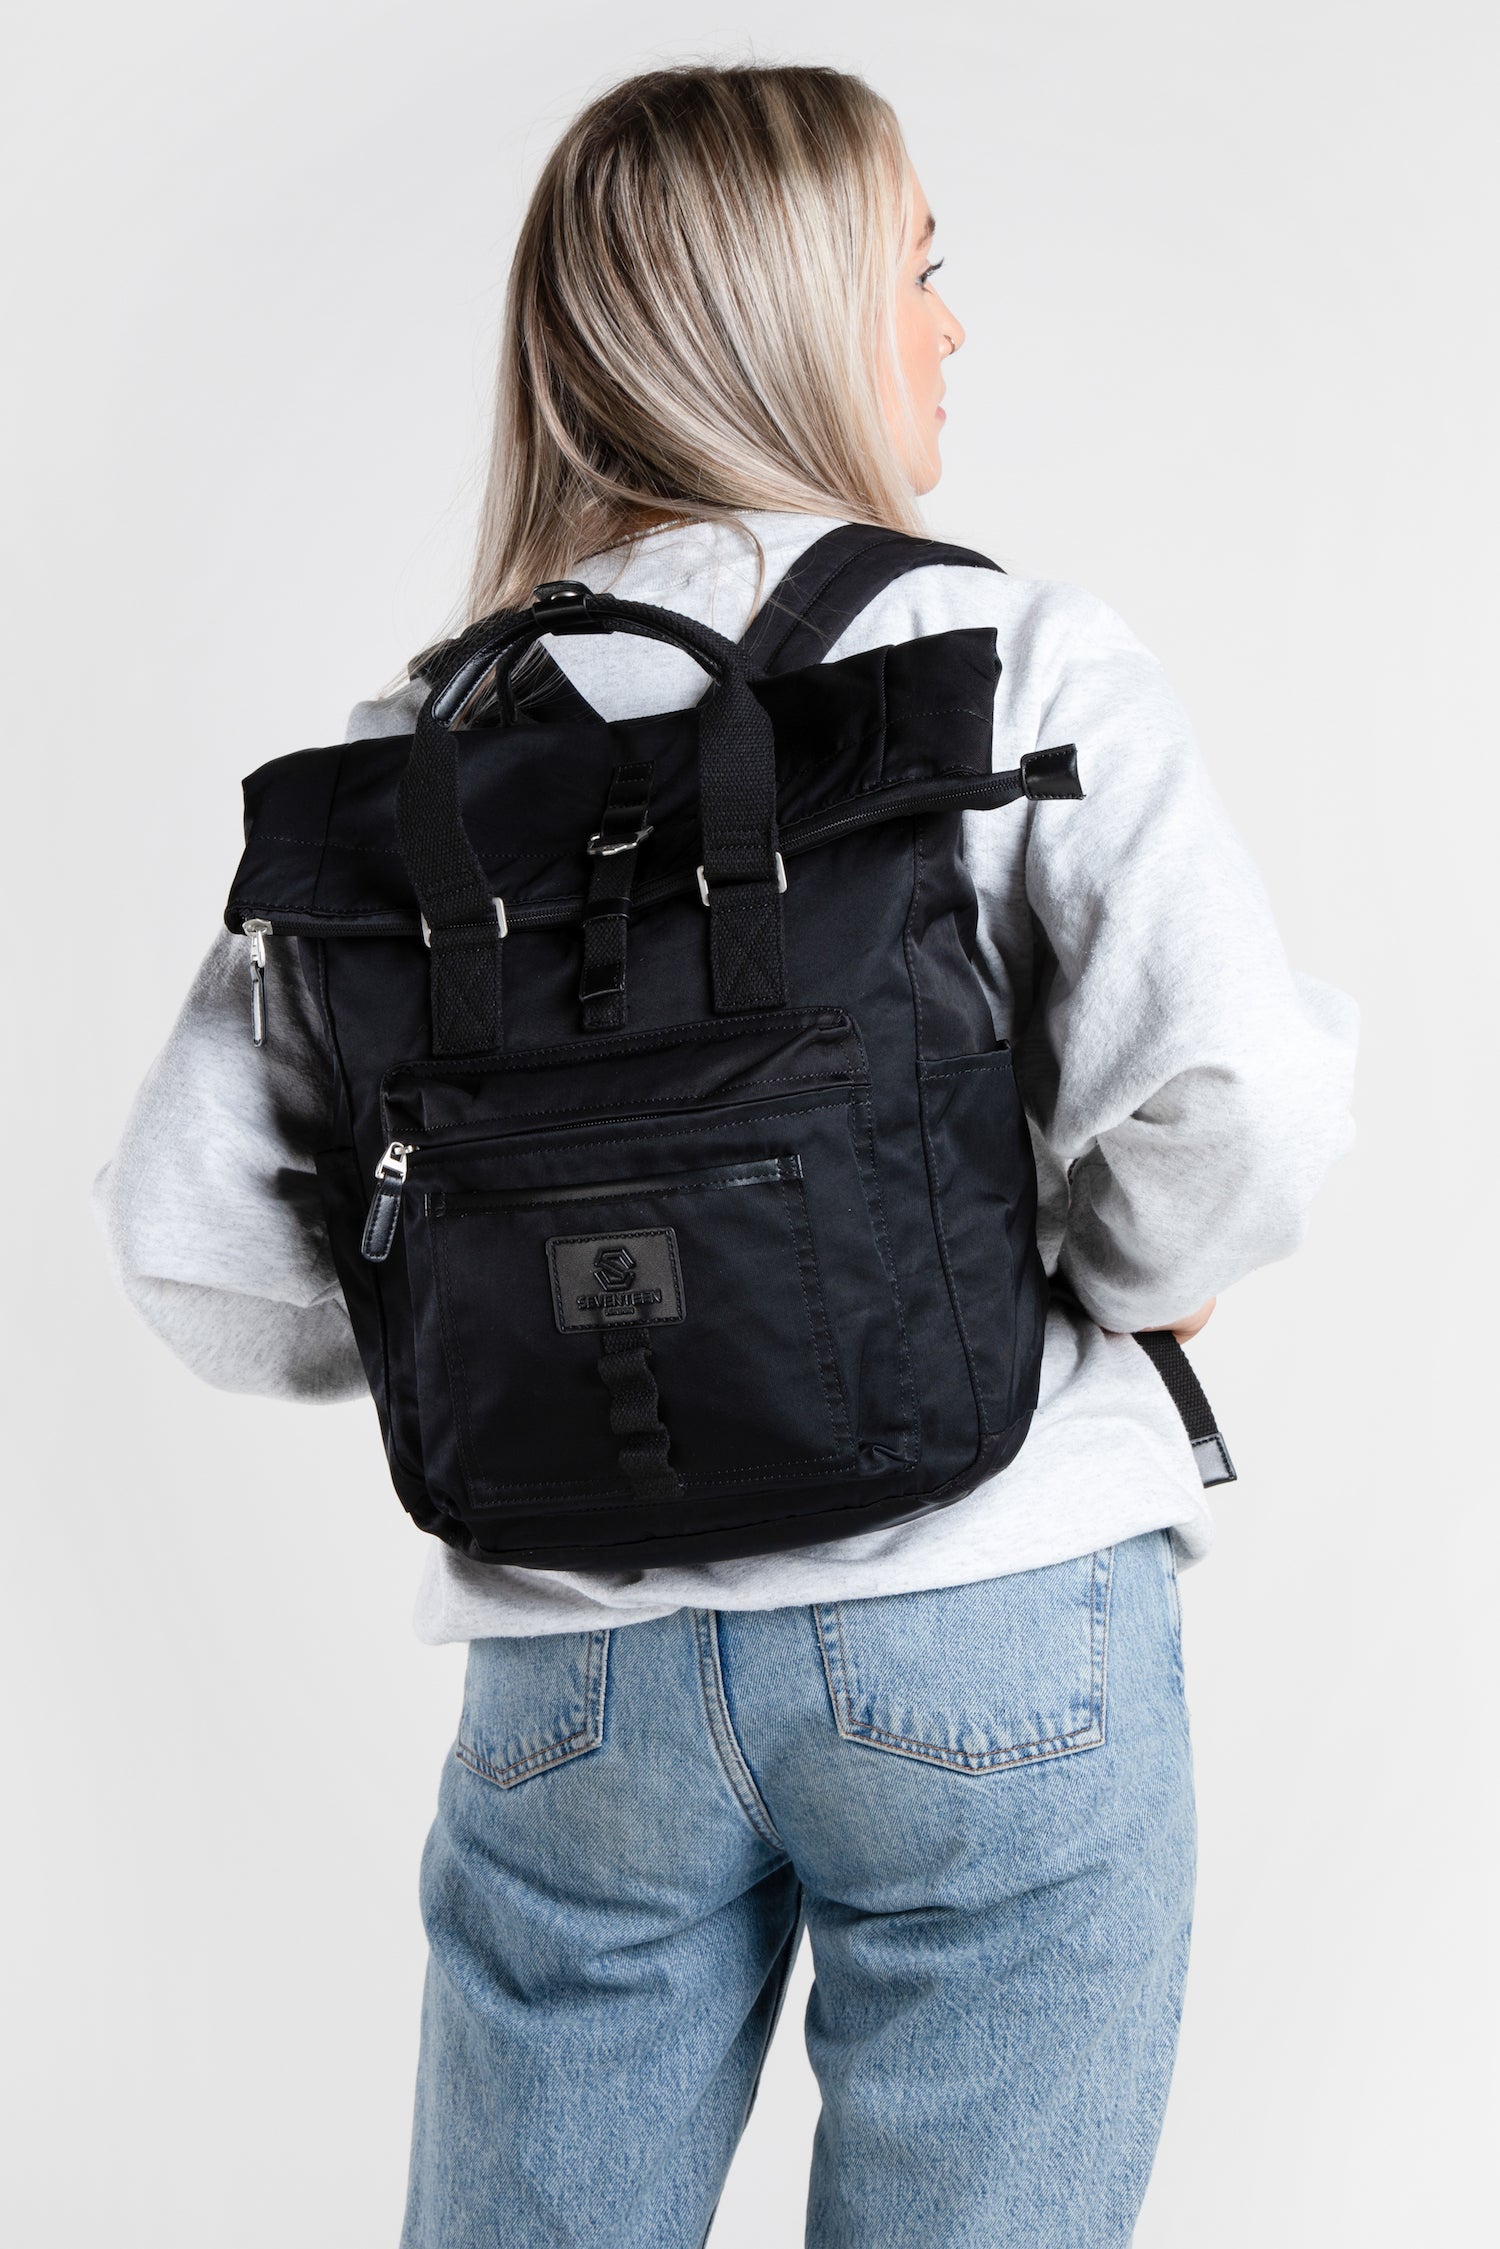 Canary Wharf Backpack - Black with Black